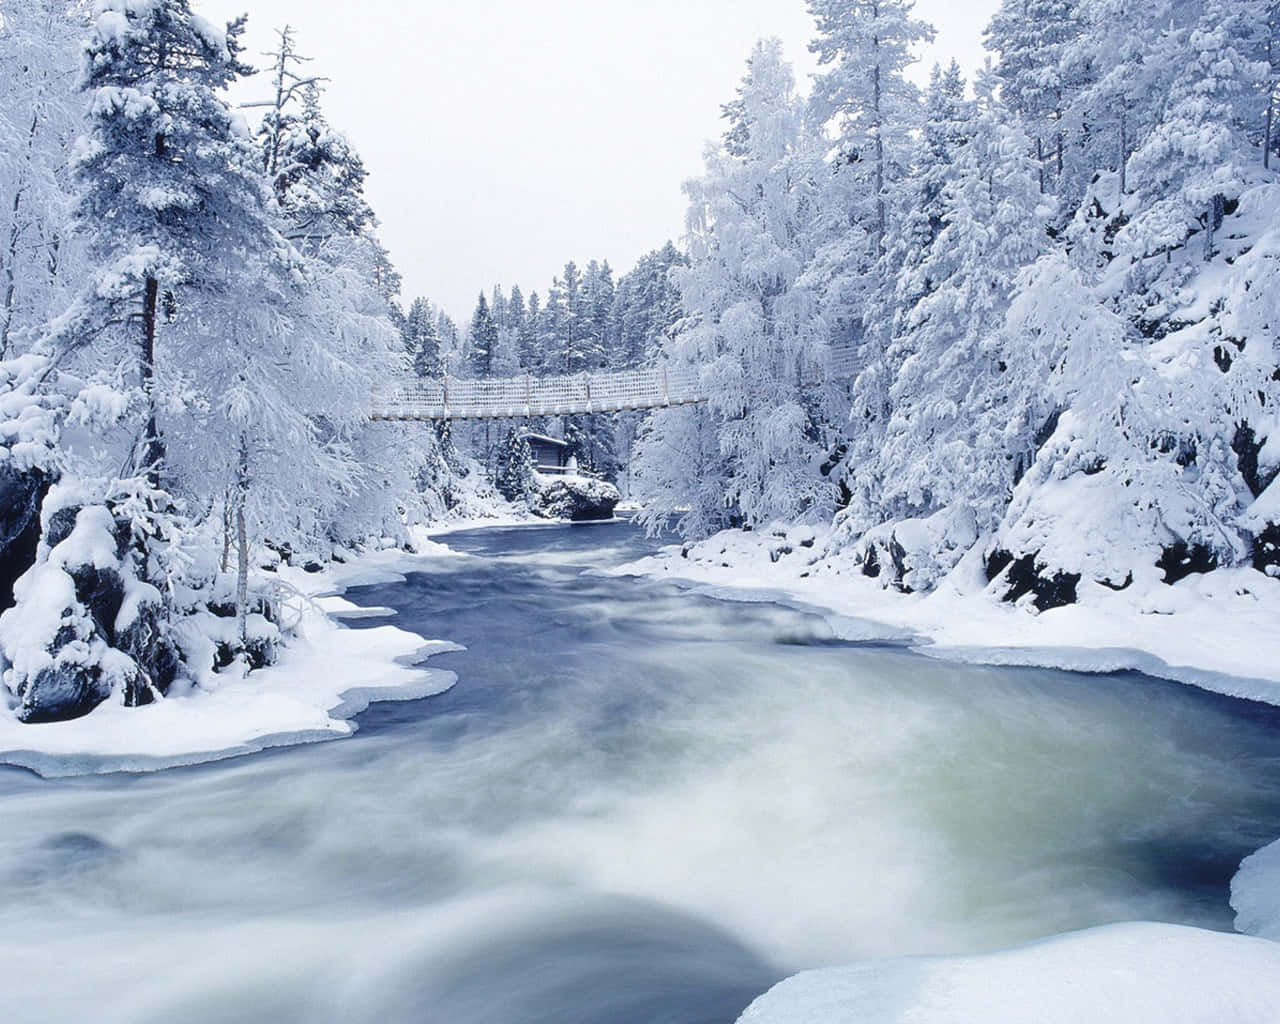 Capture the beauty of winter with this stunning snowscape.